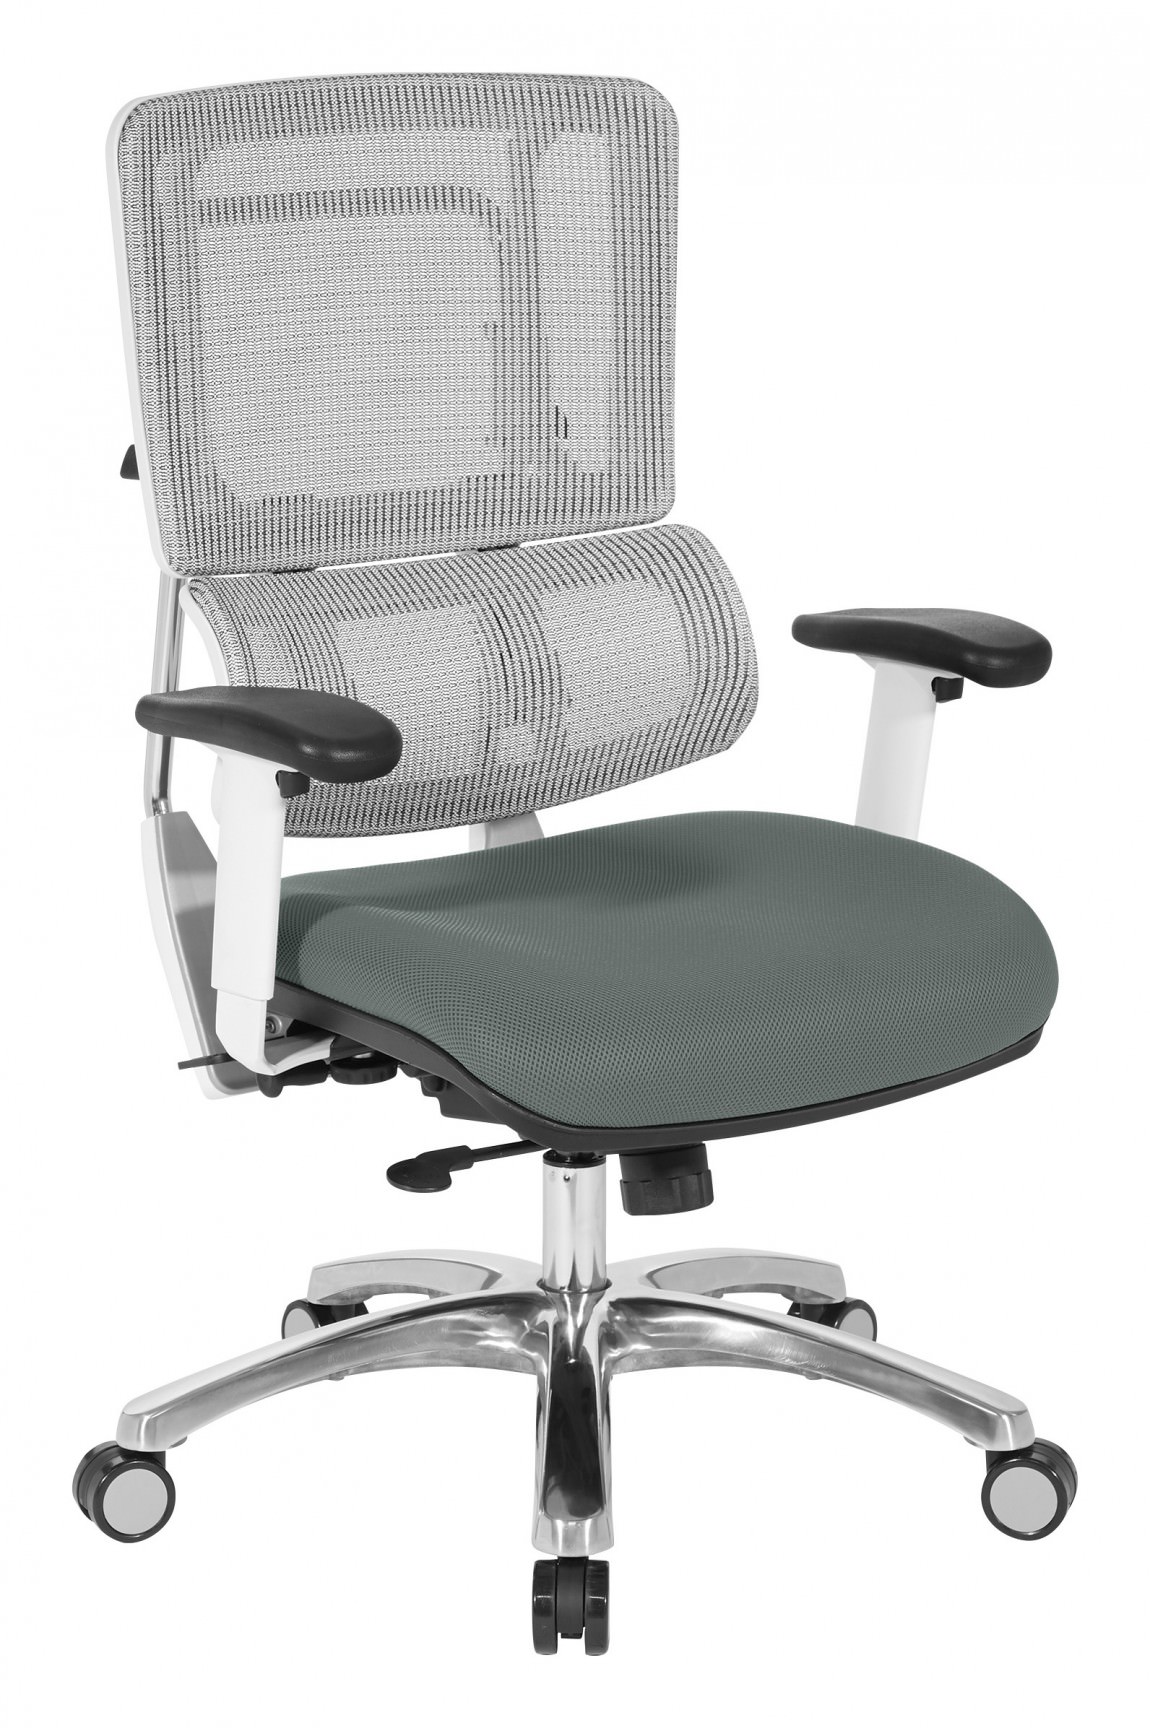 Ergonomic Office Chair with Mesh Back